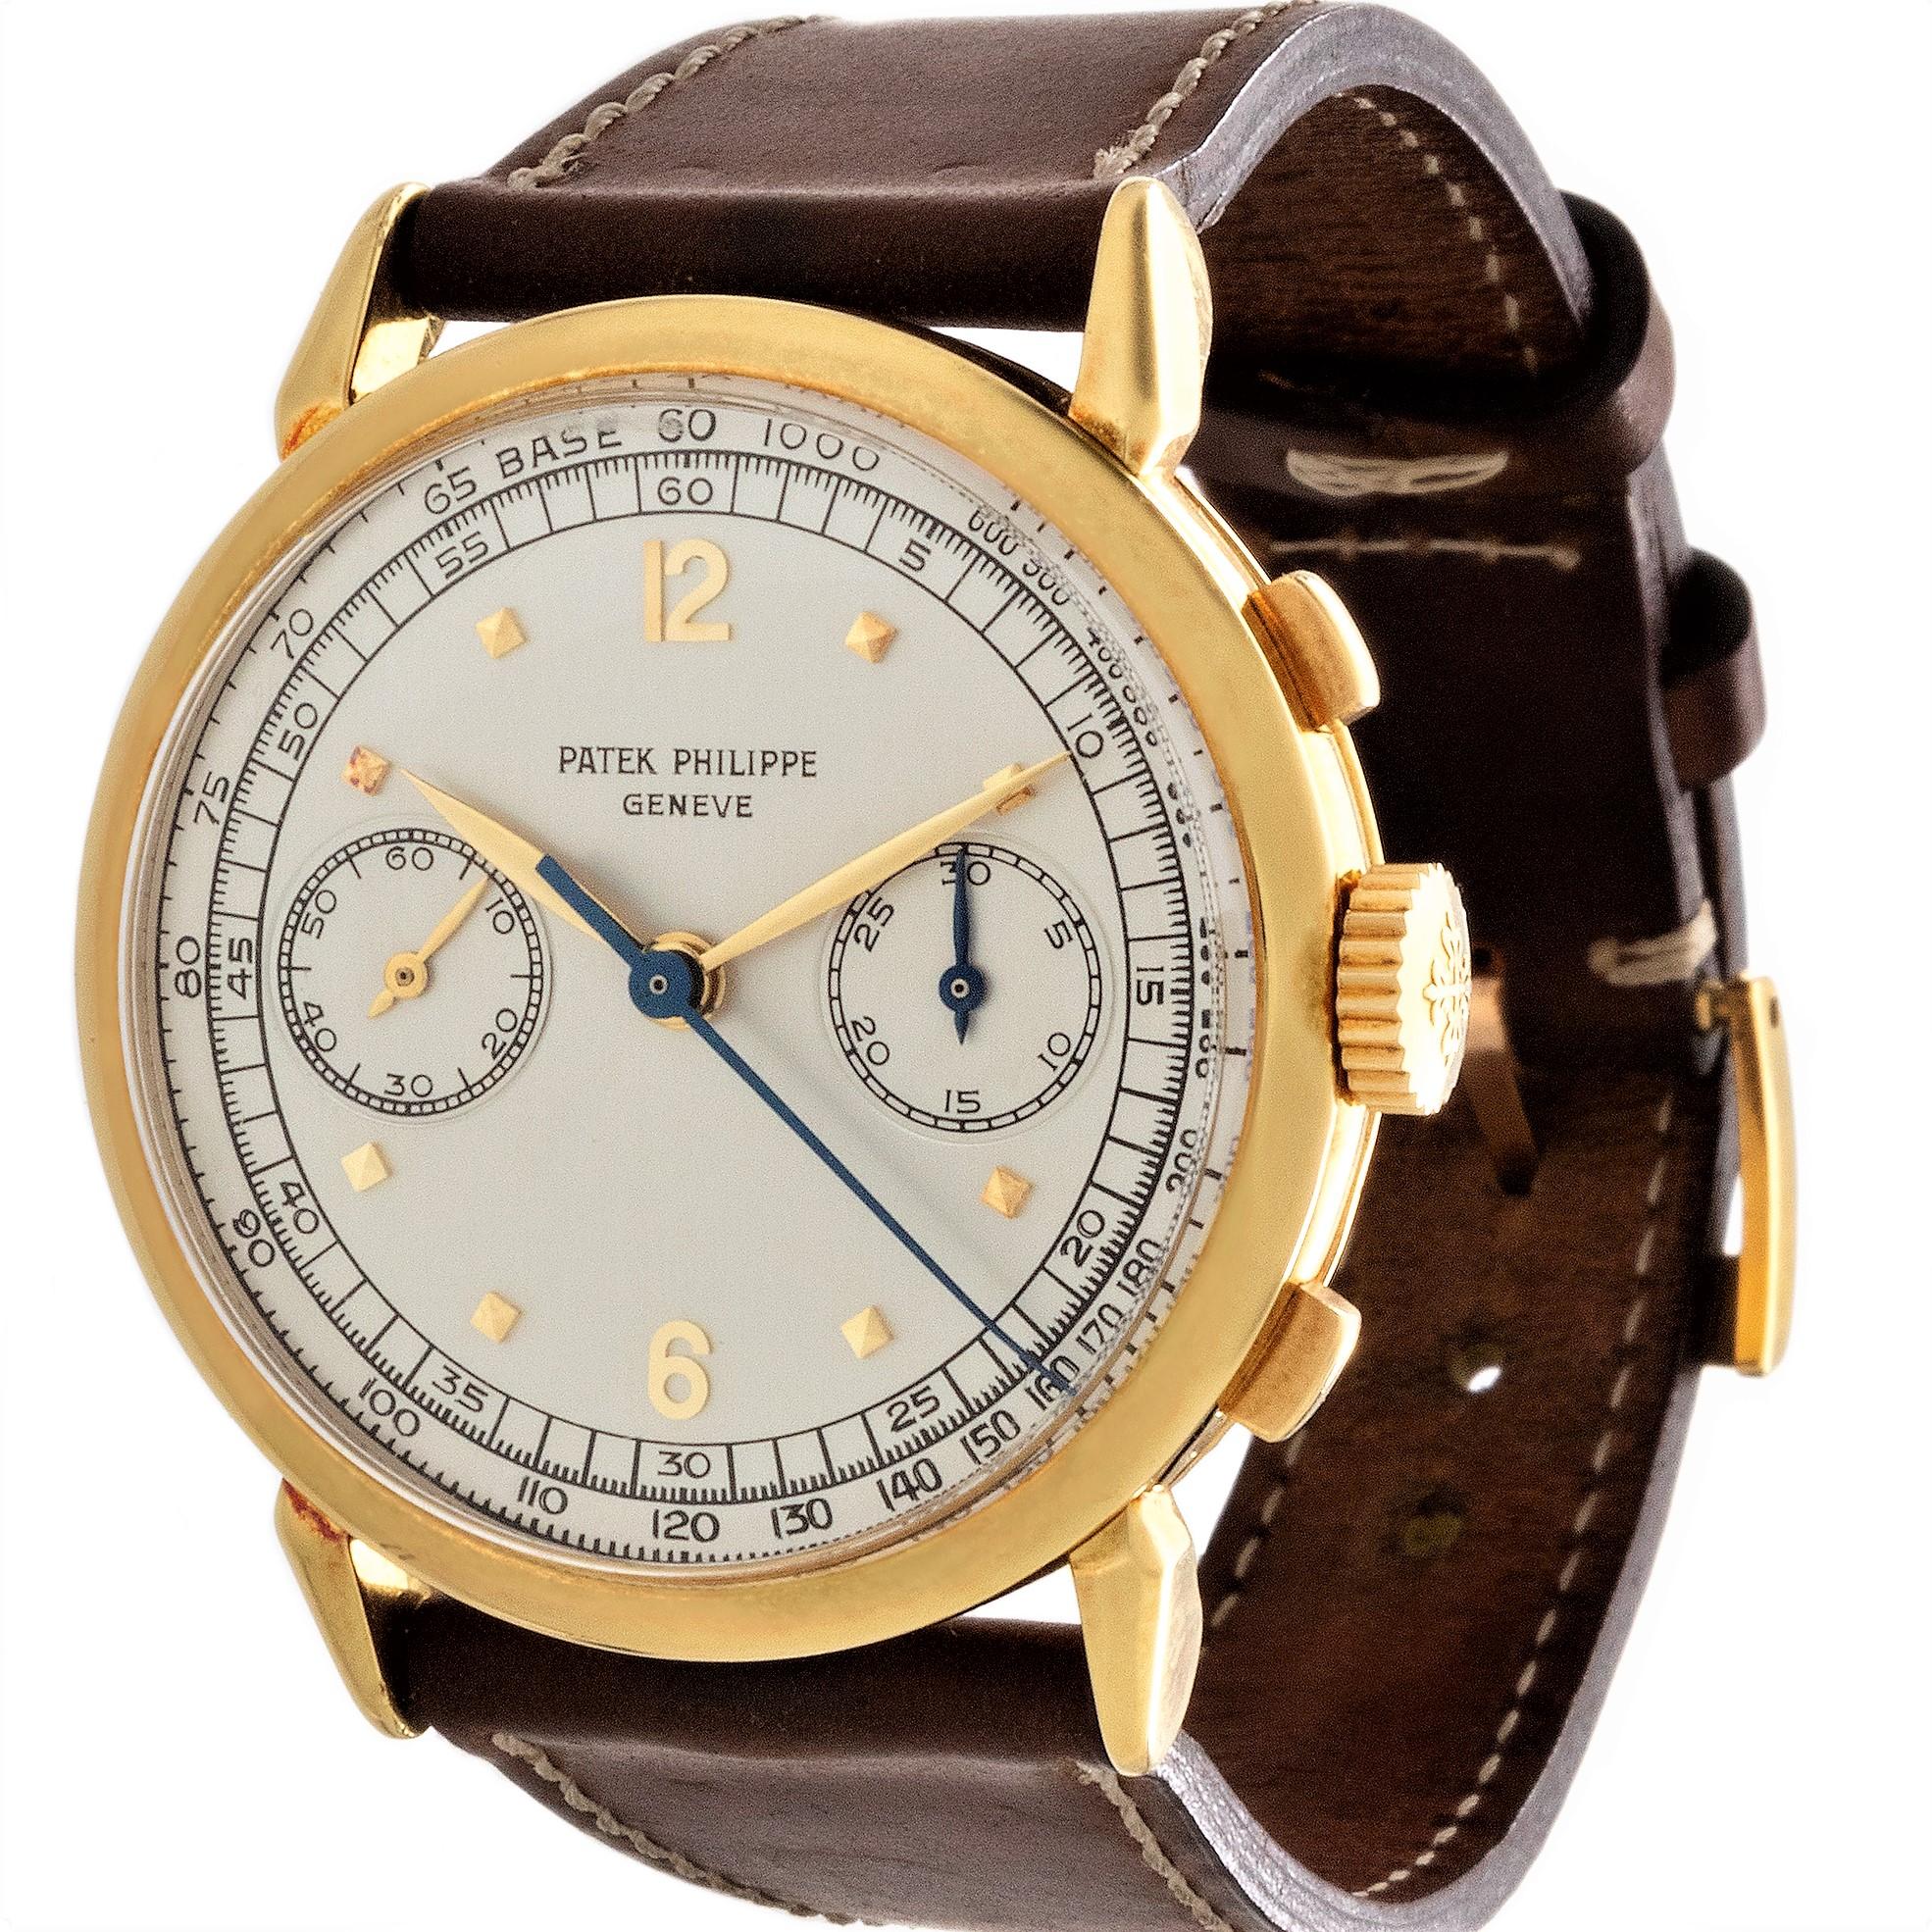 Rare Patek 1579J manual wind chronograph, made in 1951 and sold in 1952. This example has never been polished with stored orange yellow gold patina to the gold. Hallmarks are original and deep. 

The dial is original and has not been cleaned or